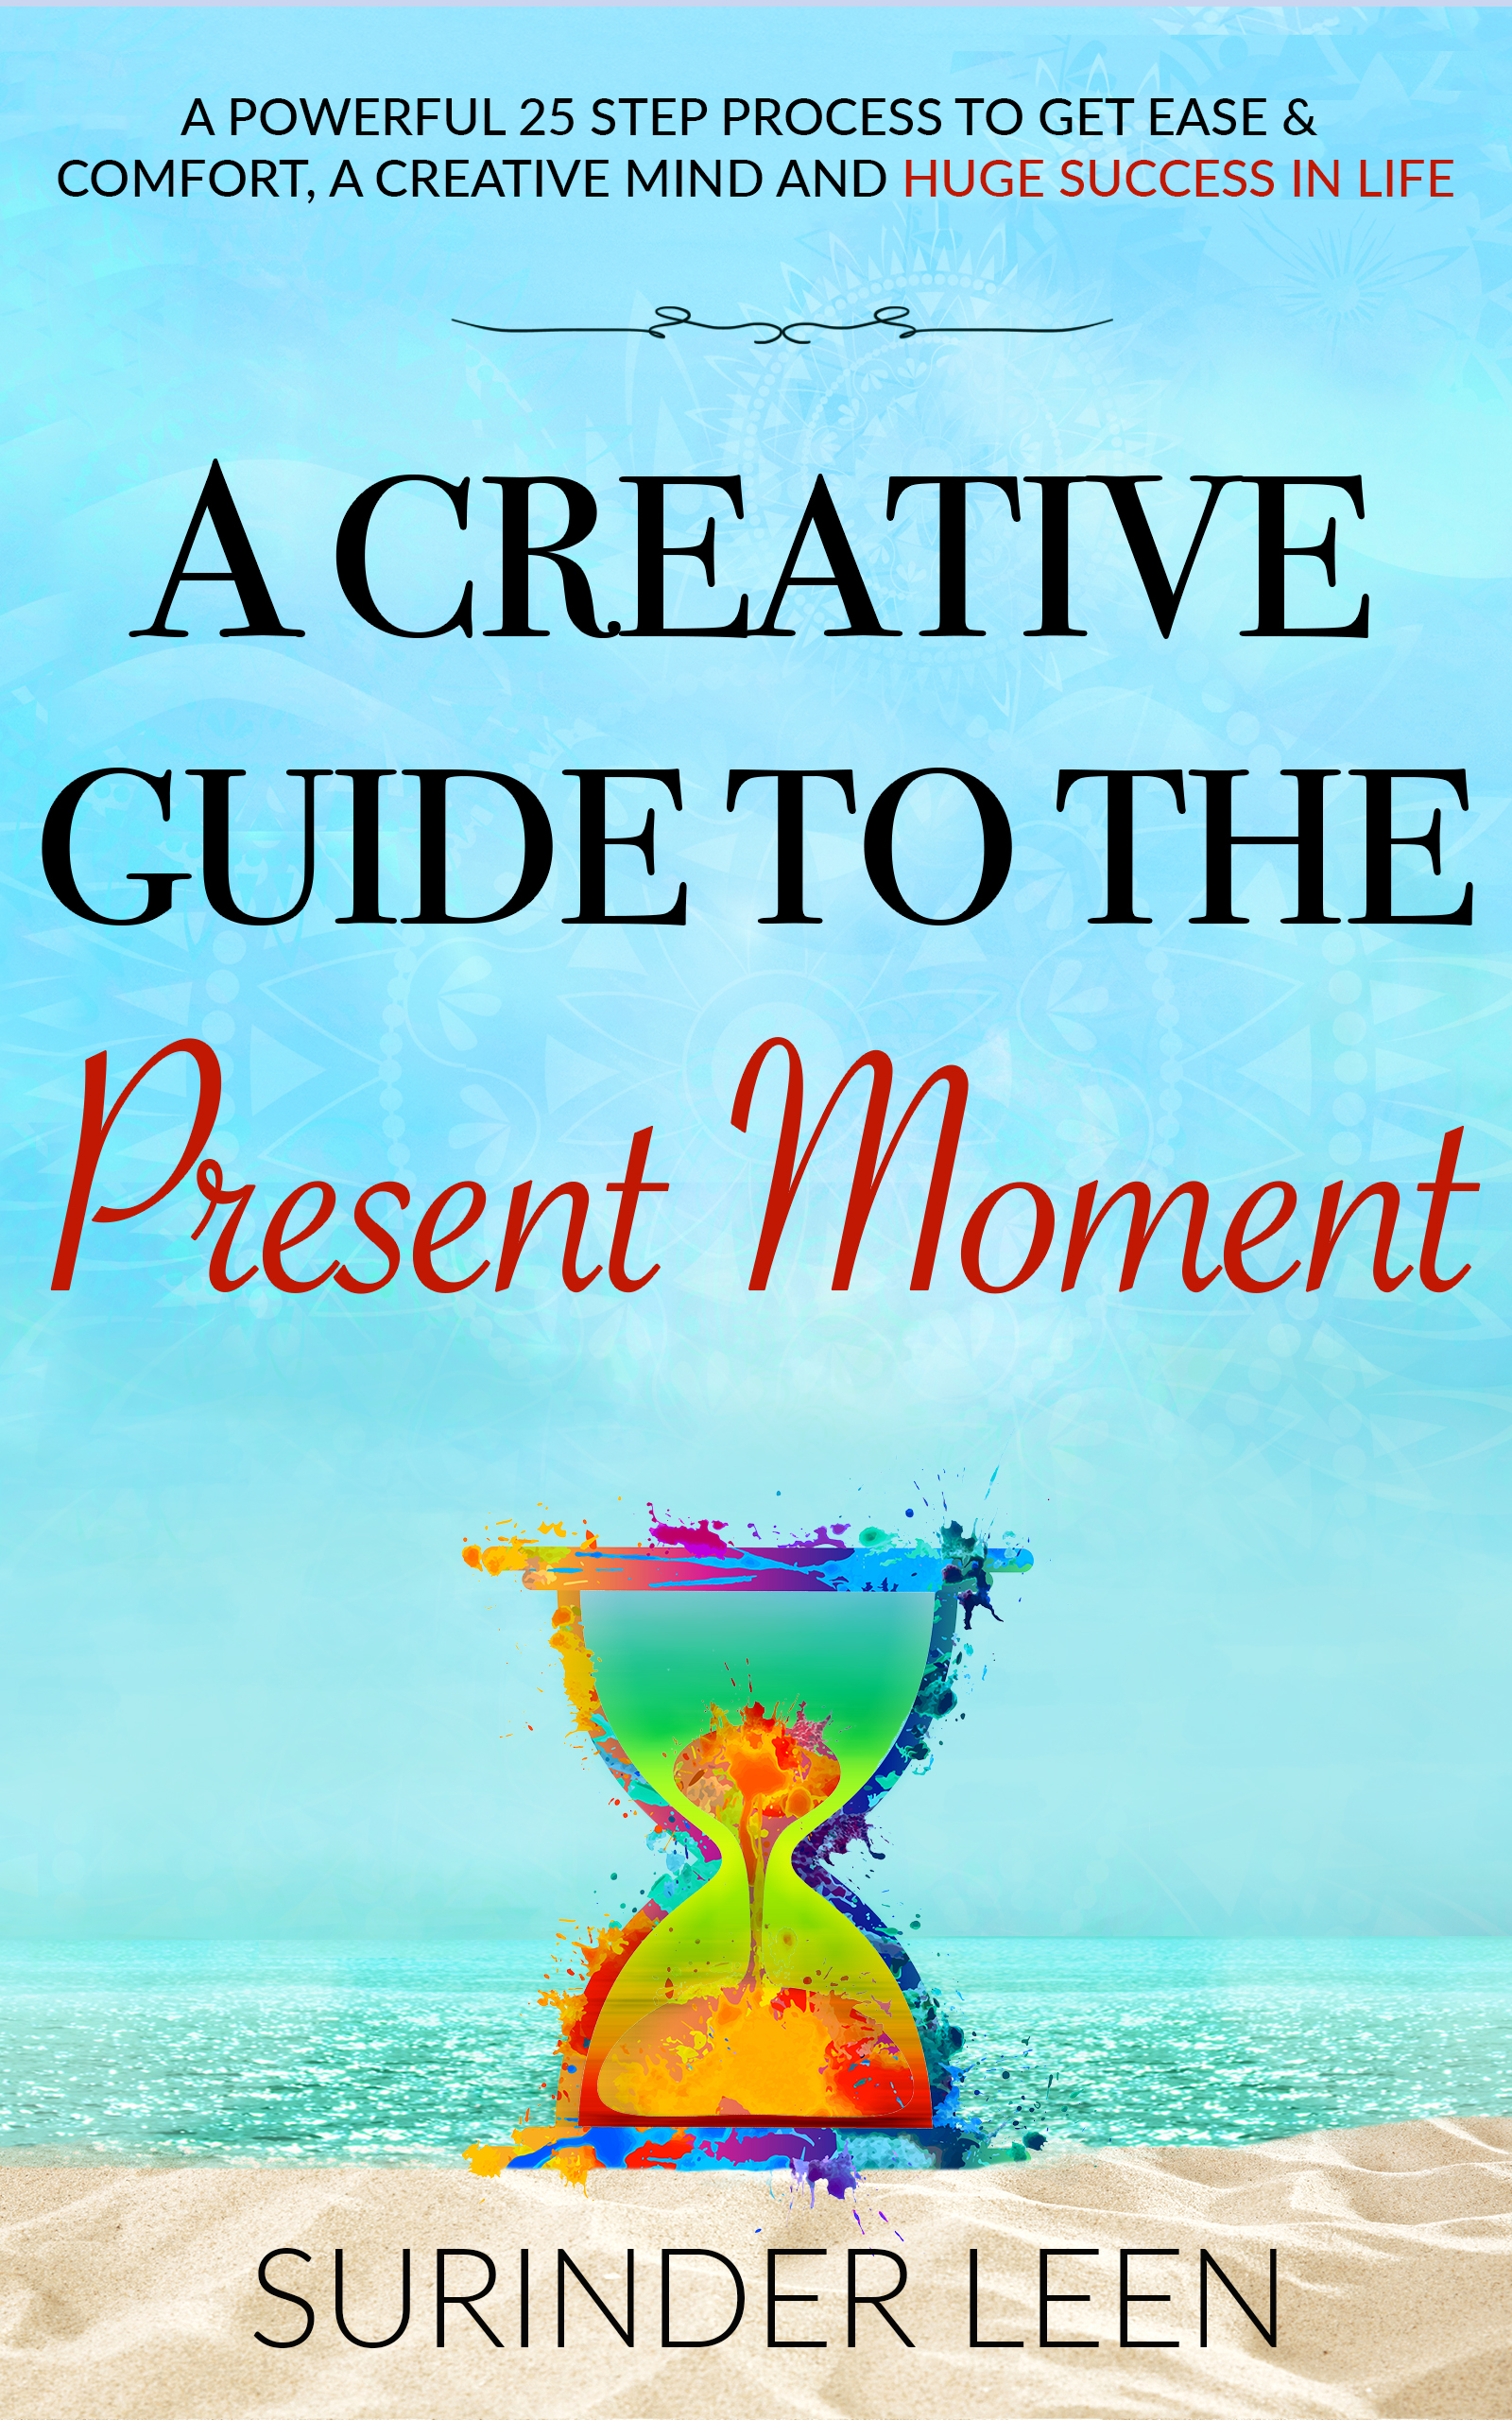 FREE: A Creative Guide to the Present Moment by Surinder Leen